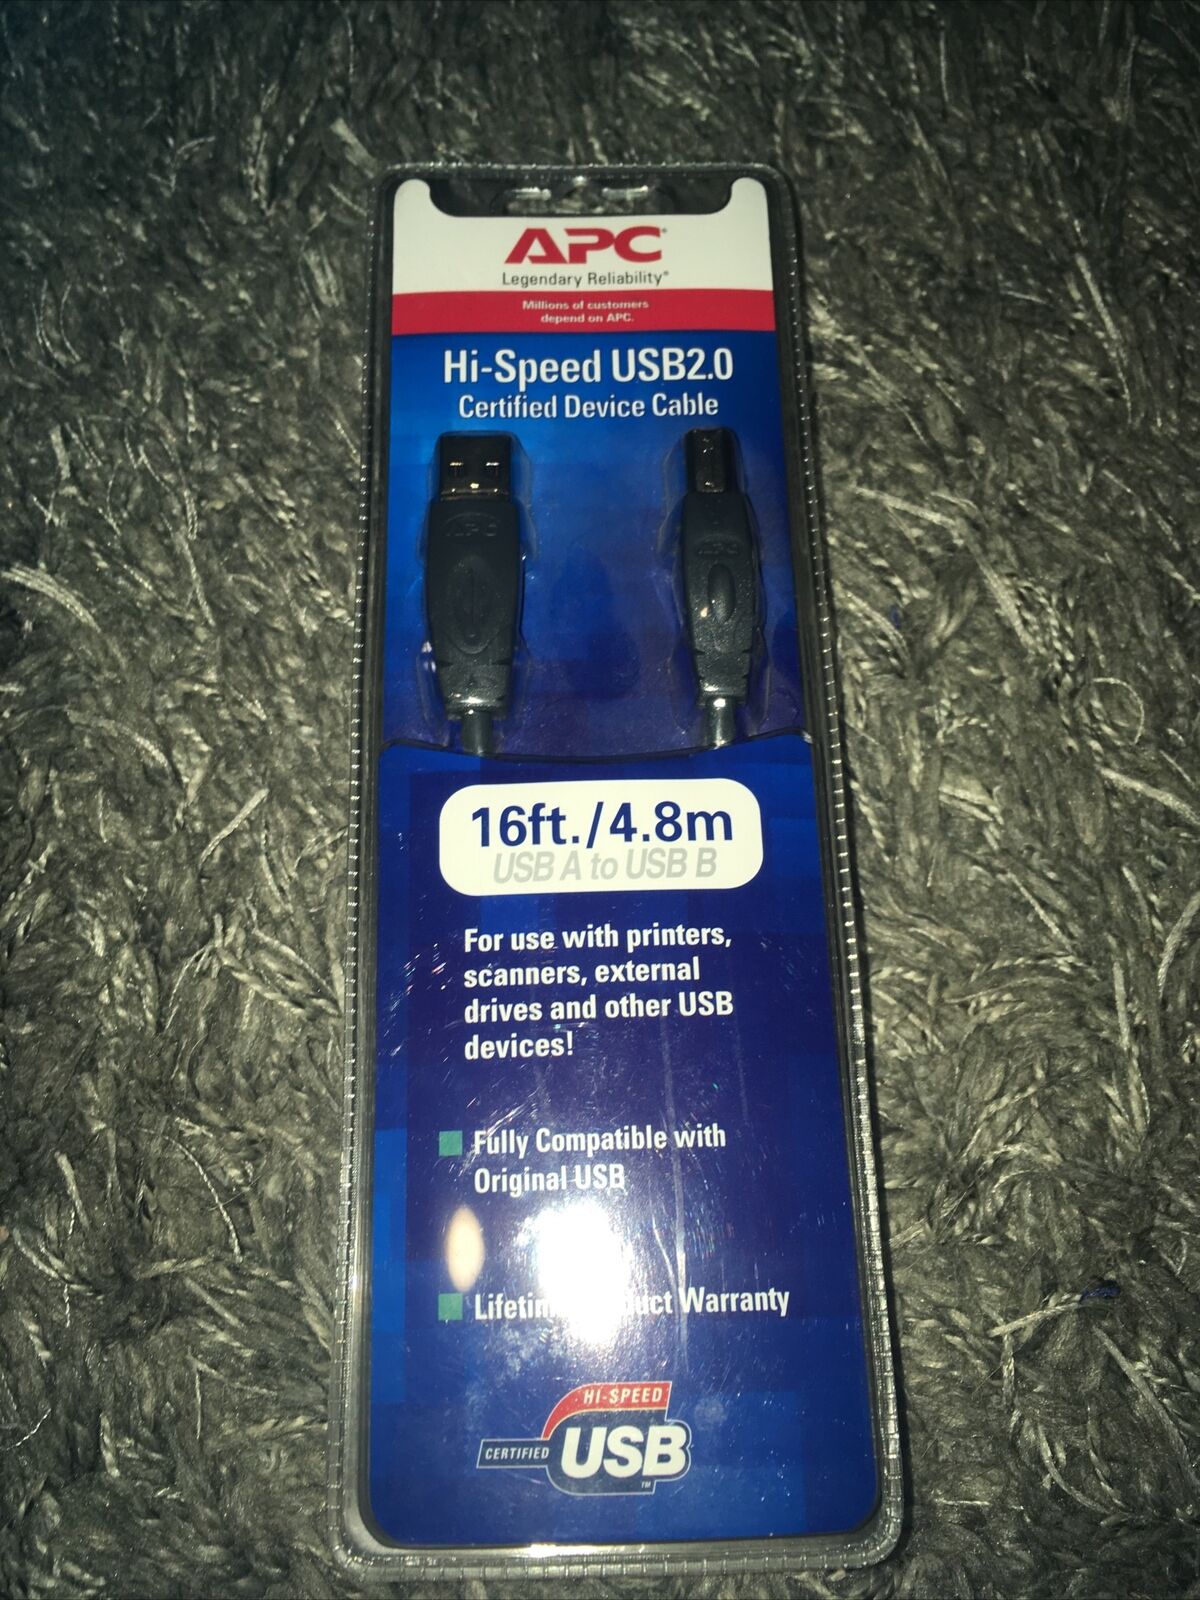 New APC Hi-Speed USB 2.0 Certified Device Cable. USB A to B  16ft/4.8m